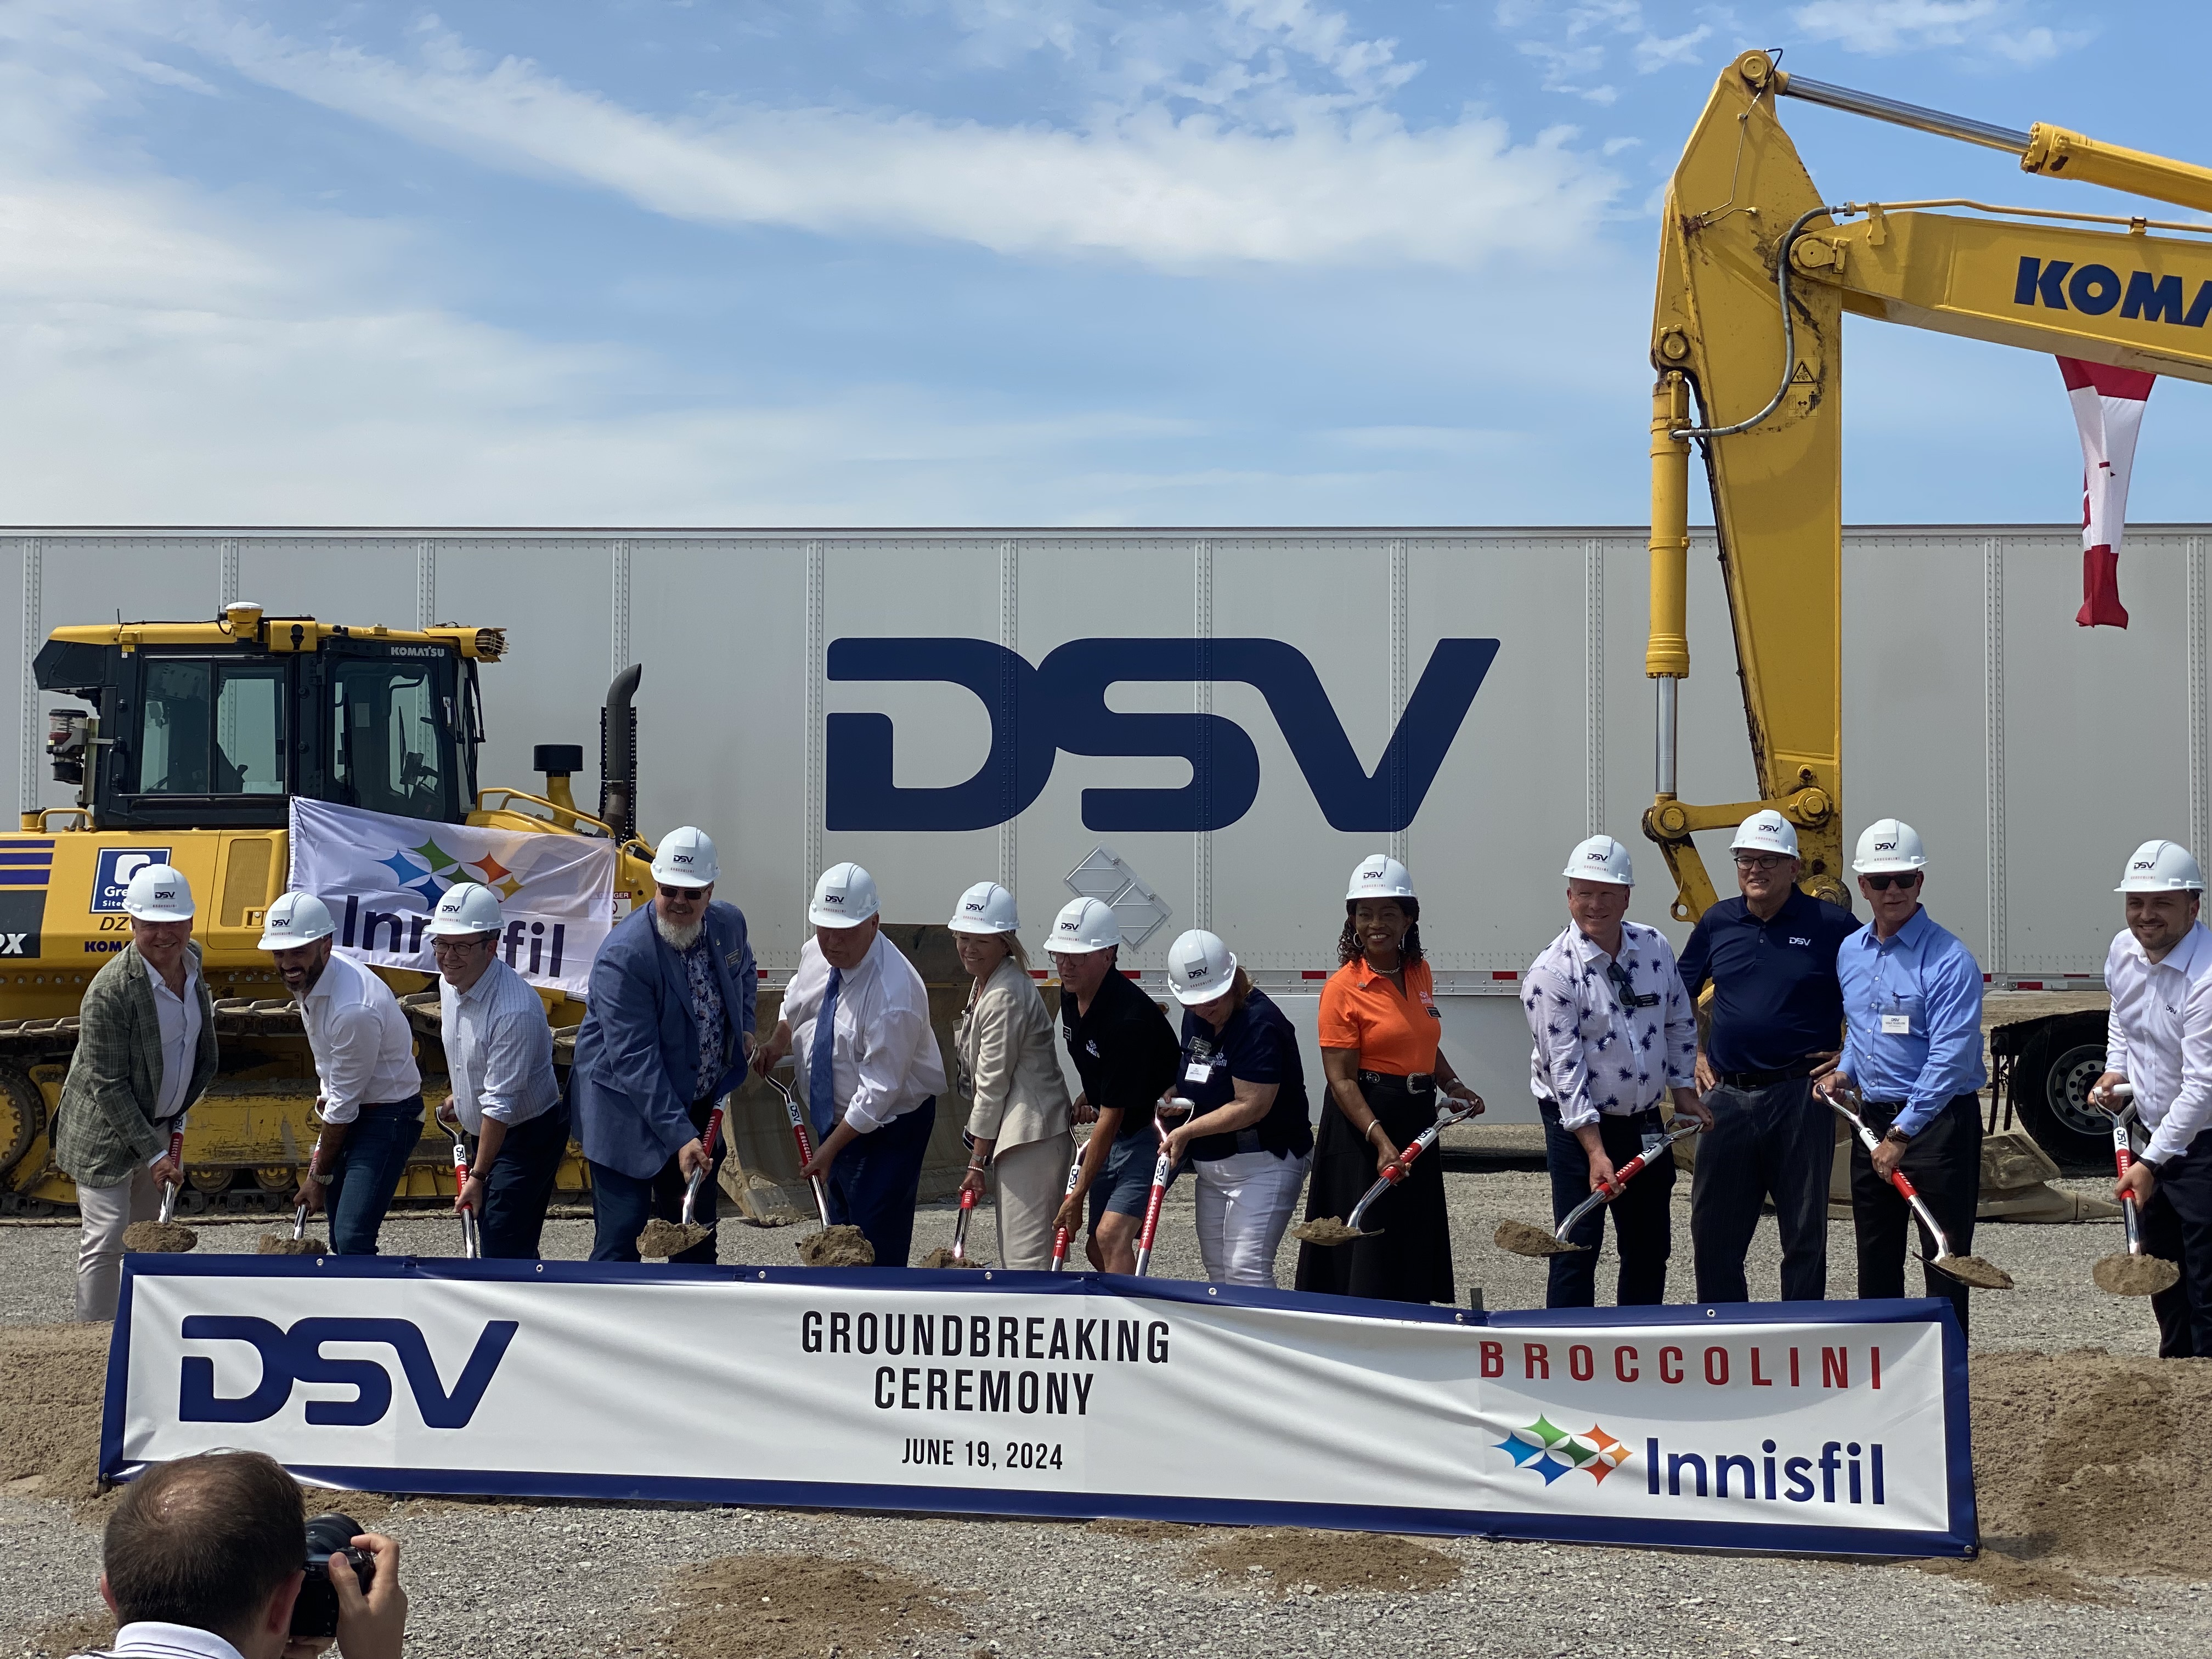 Ontario Premier Doug Ford, along with Innisfil Mayor Lynn Dollin, Deputy Mayor Kenneth Fowler, Innisfil Council, and associates from Broccolini and DSV - Global Transport and Logistics participate in the ground breaking for DSV's newest state-of-the-art warehousing facility in Innisfil Heights Employment Area